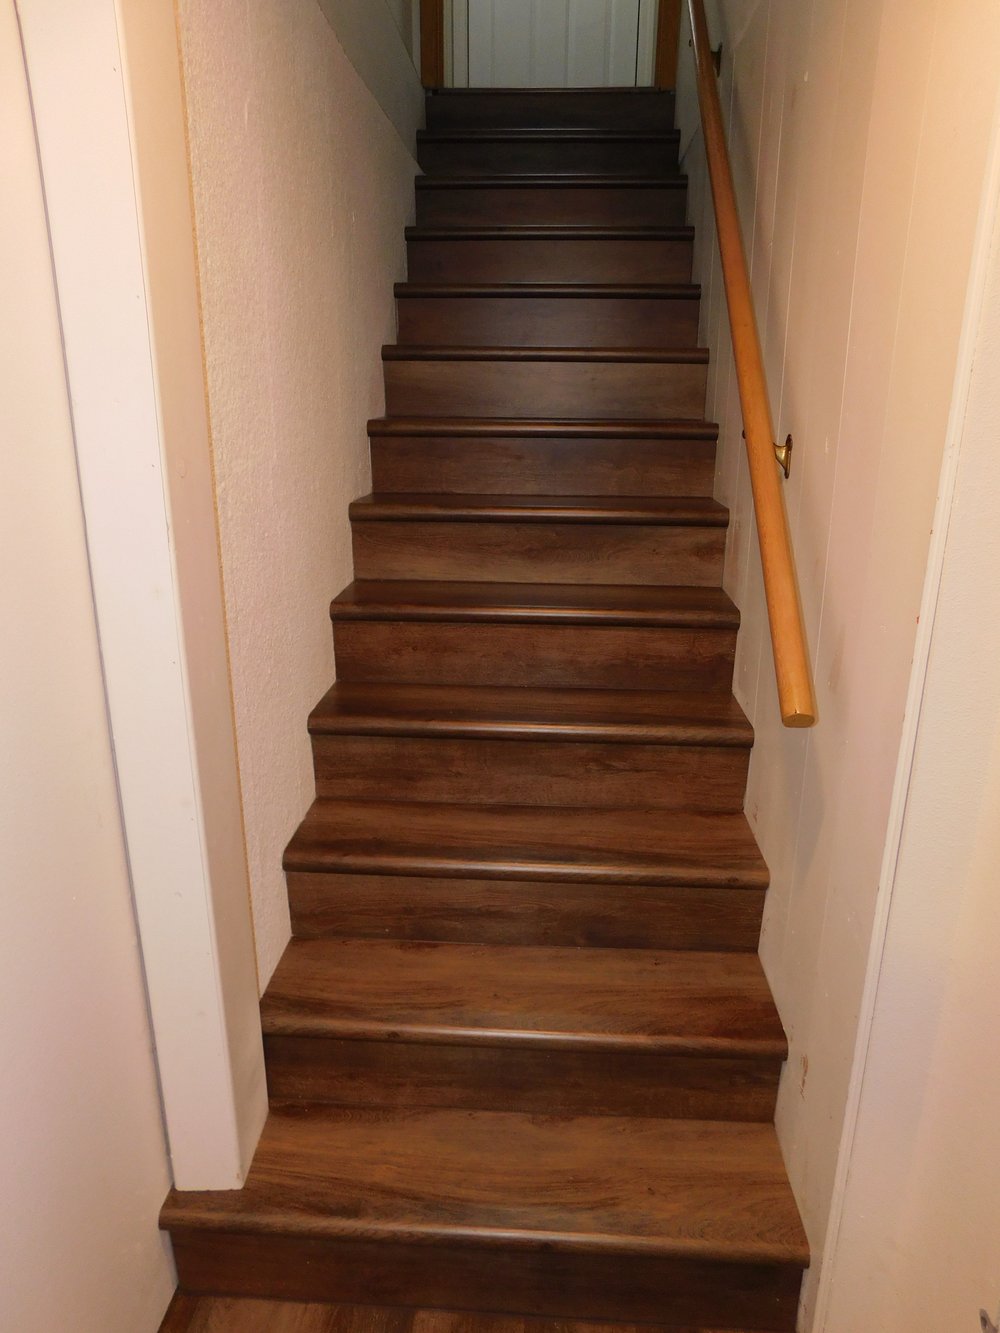 LVT Stairs